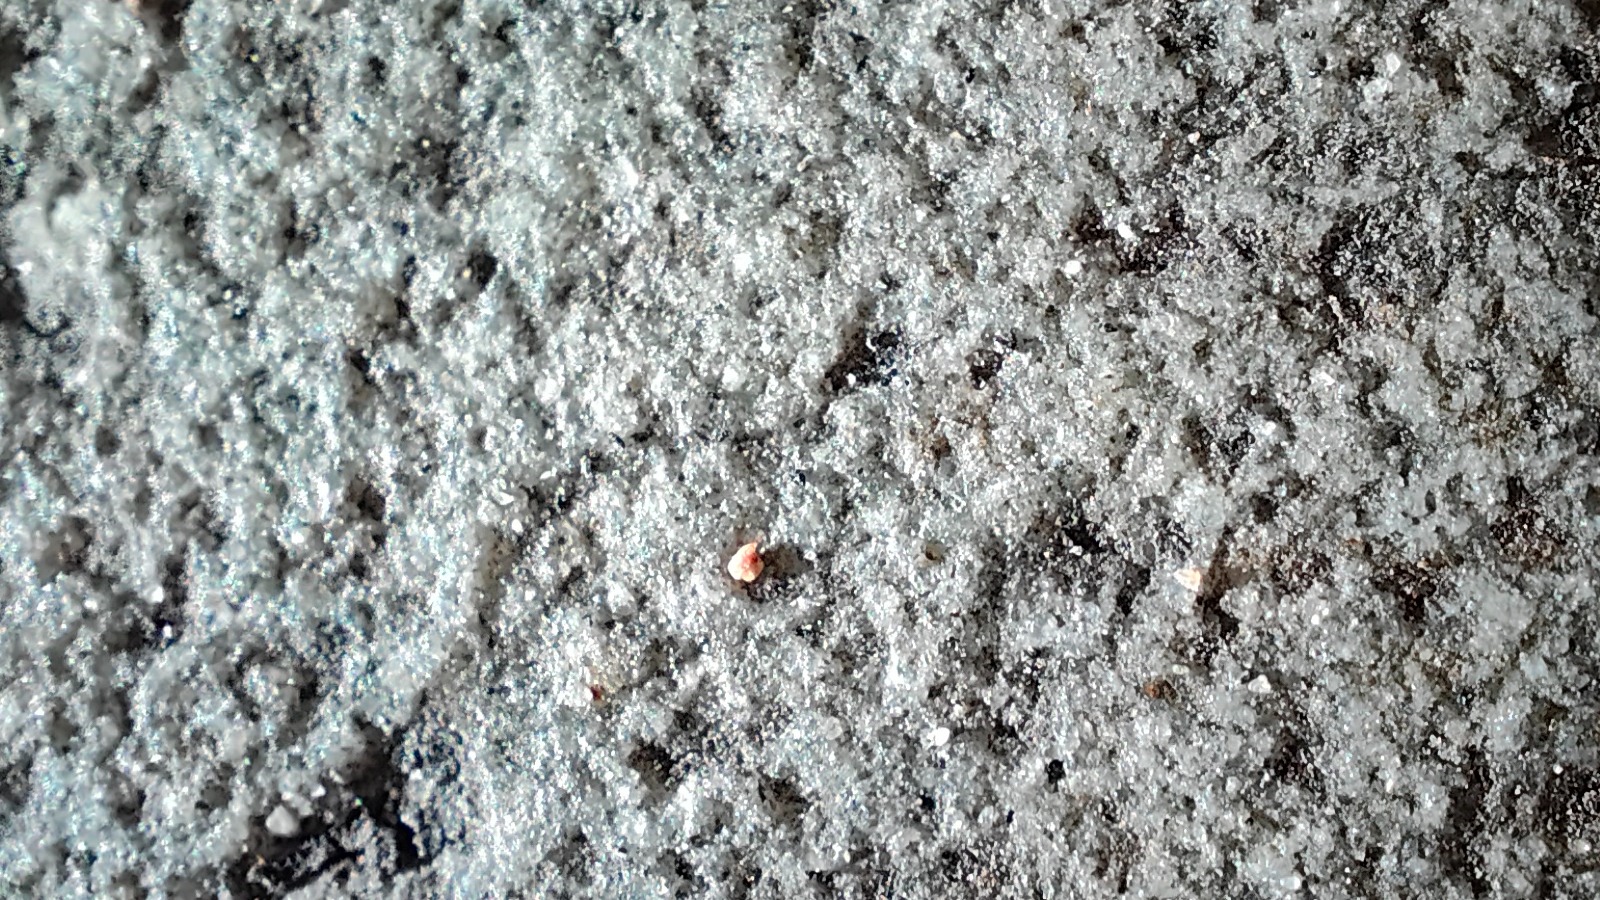 Microscopic picture of the pavement taken using the Realme GT 2 Pro